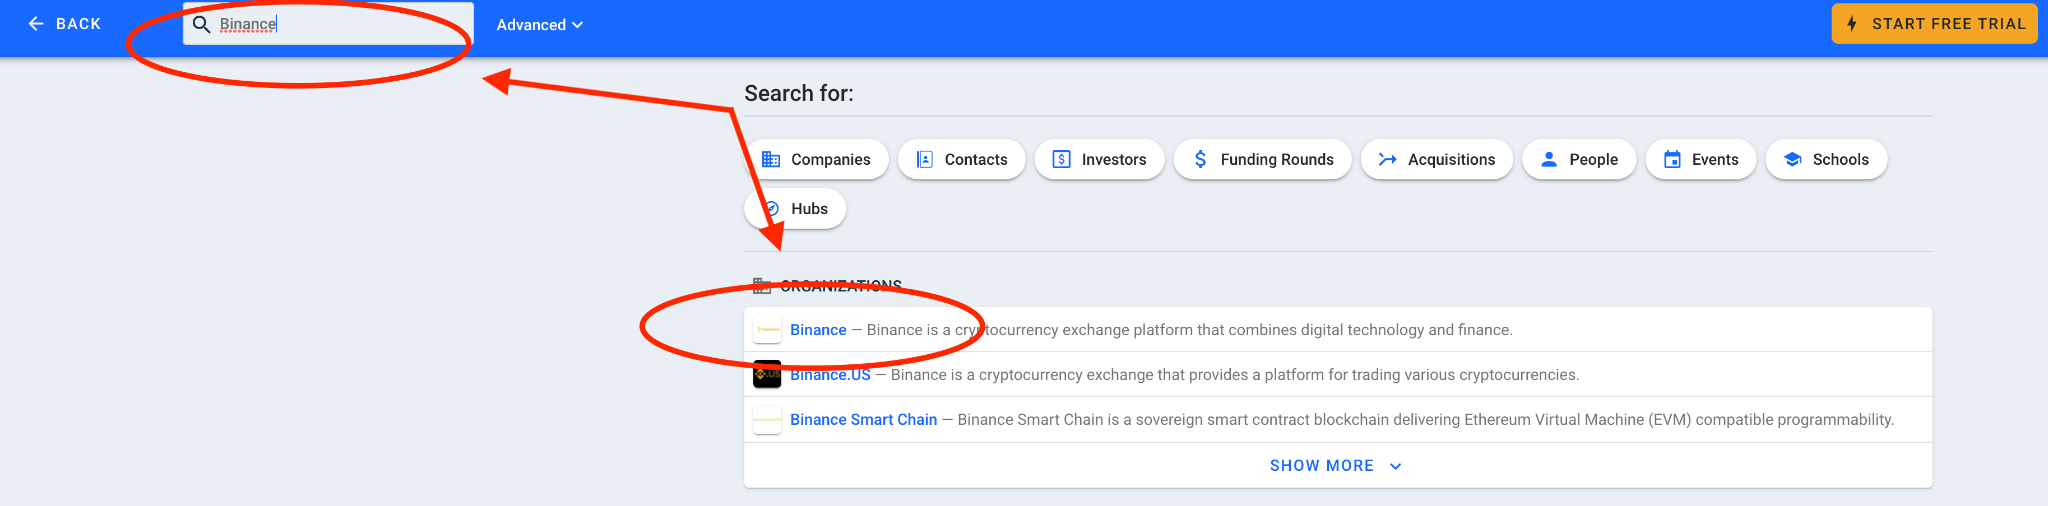 Quick guide on getting insights through Crunchbase - Click on the first result that appears to see the company’s details